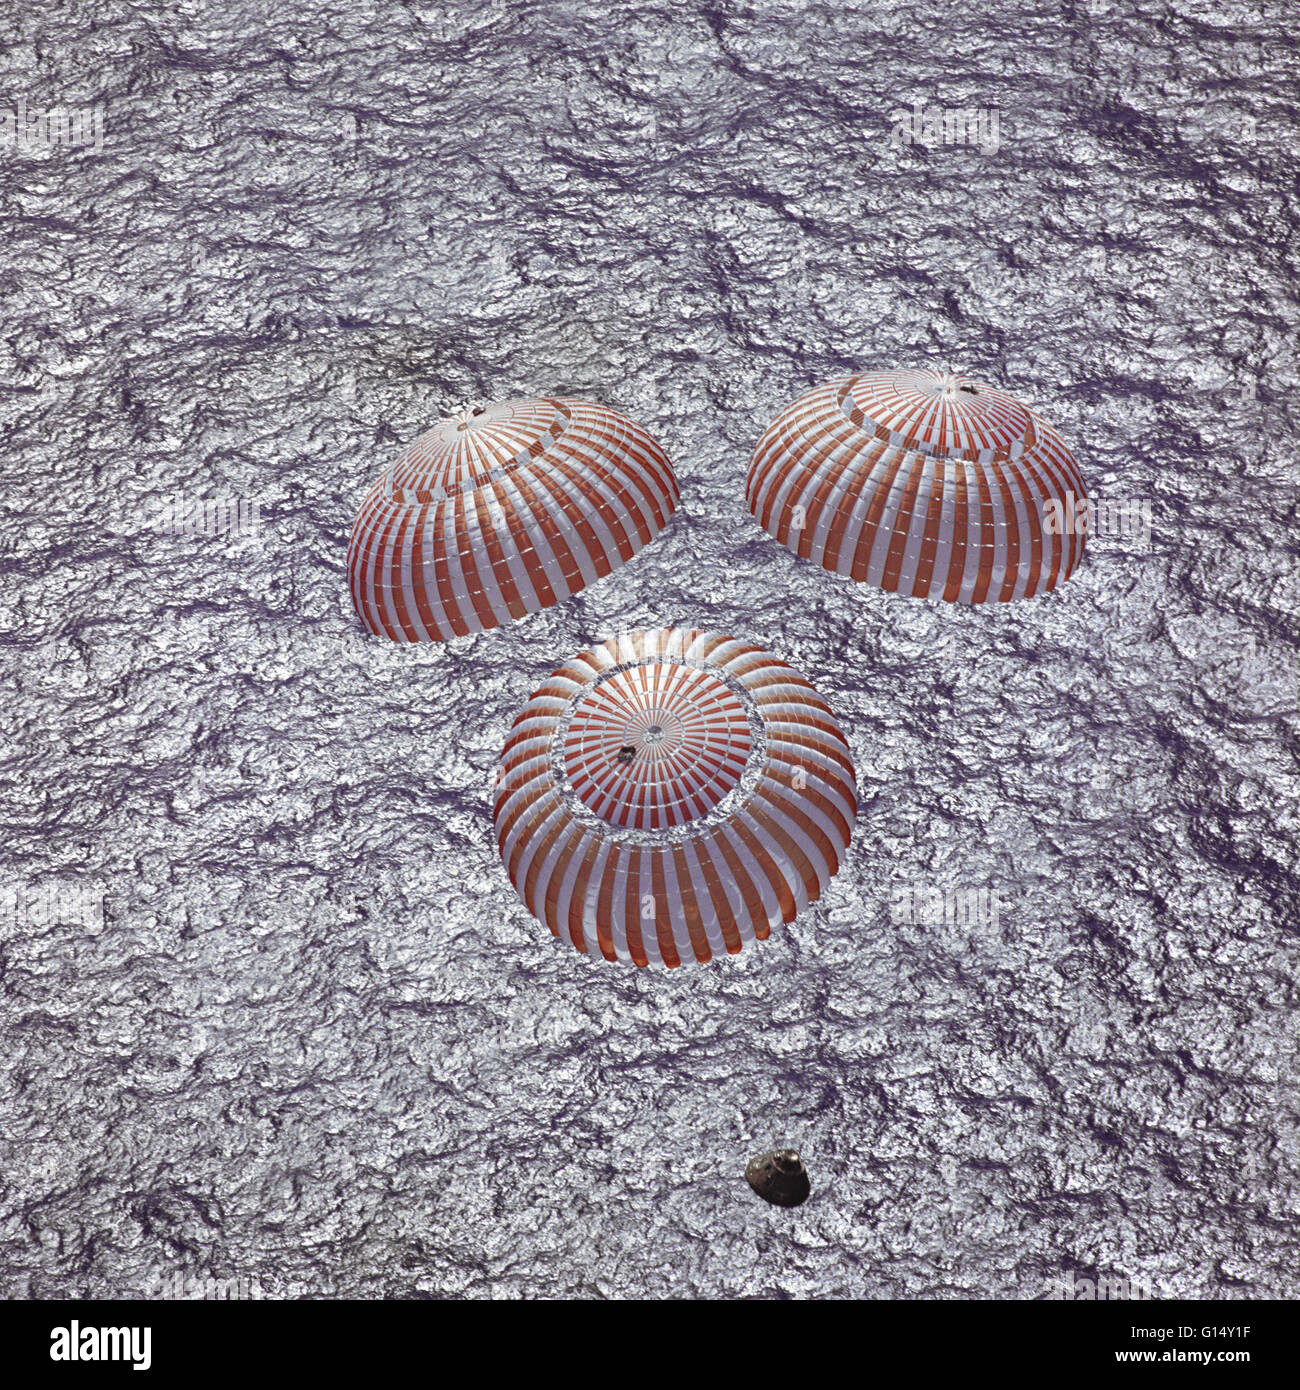 The Apollo 16 command module, with astronauts John W. Young, Thomas K. Mattingly II and Charles M. Duke Jr. aboard, nears splashdown in the central Pacific Ocean to successfully conclude a lunar landing mission. This overhead picture was taken from a reco Stock Photo